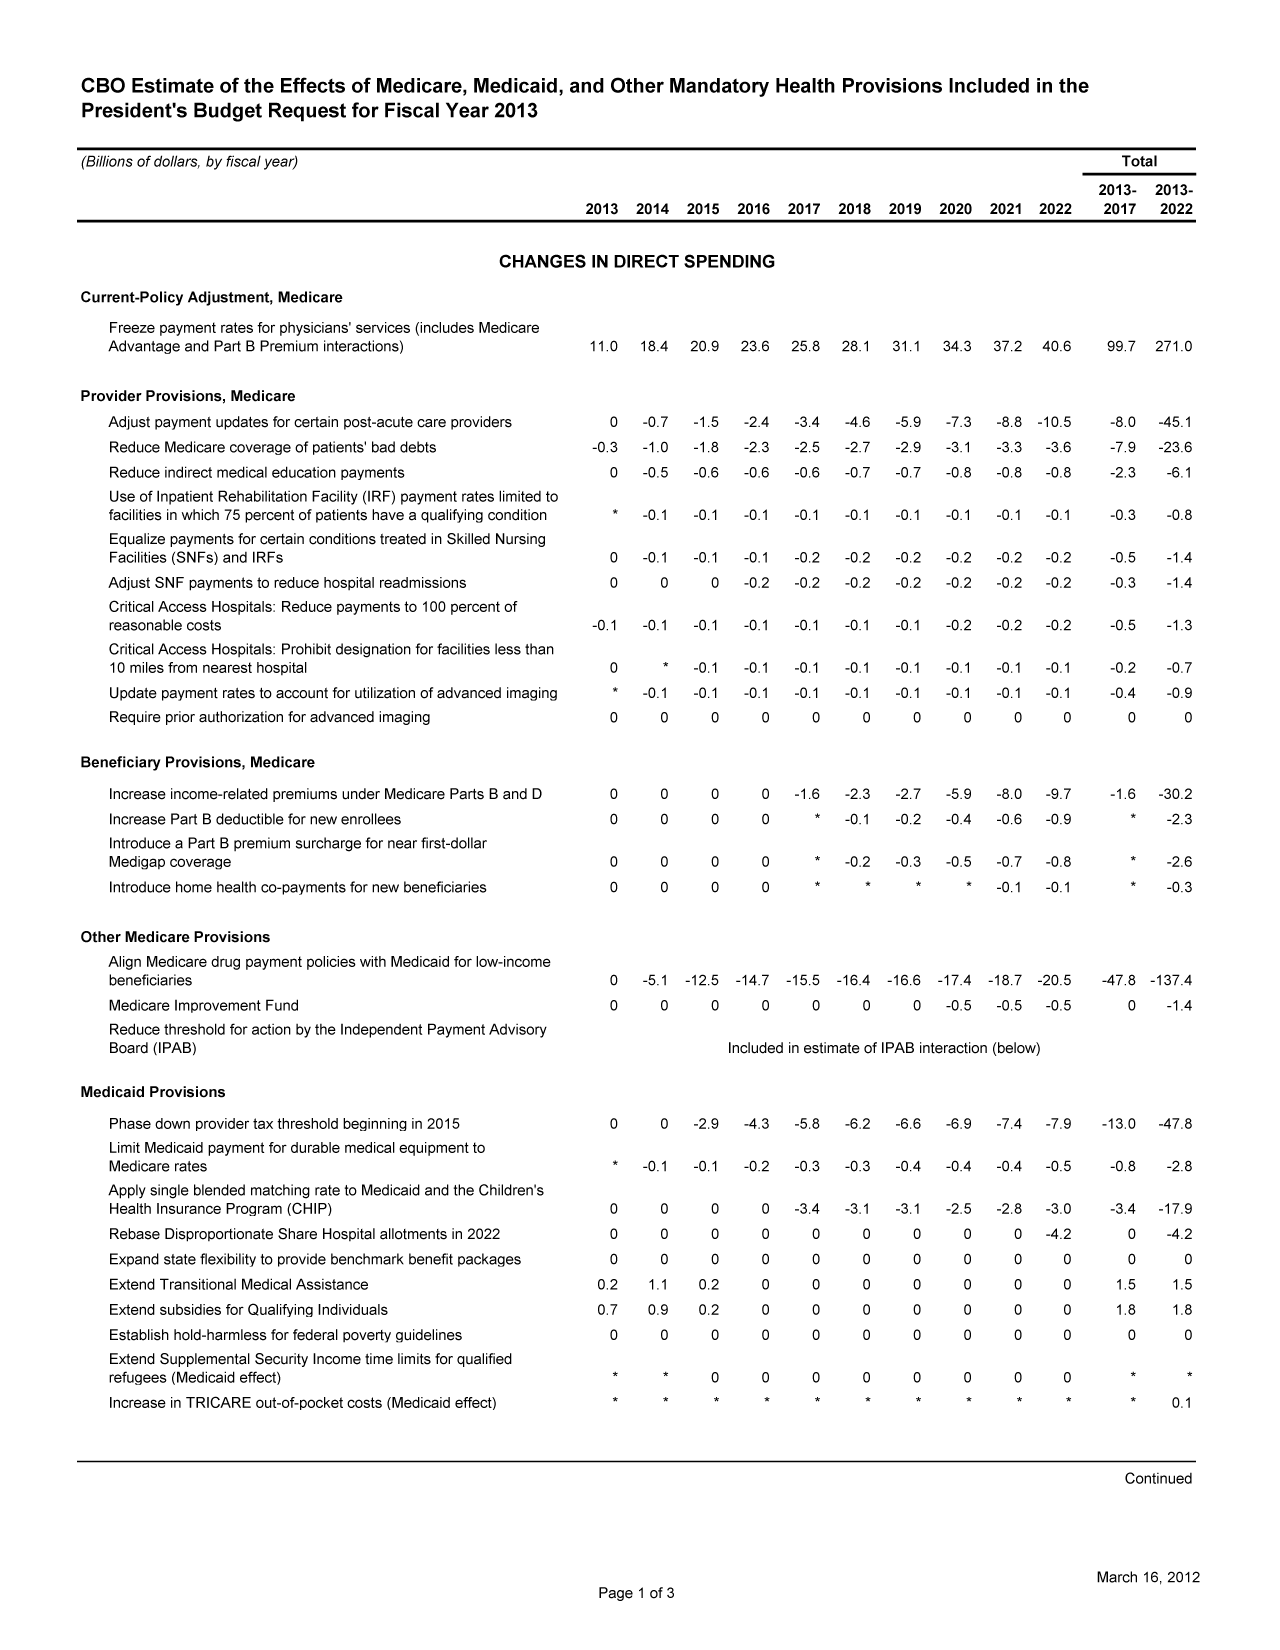 handle is hein.congrec/cbo10688 and id is 1 raw text is: CBO Estimate of the Effects of Medicare, Medicaid, and Other Mandatory Health Provisions Included in the
President's Budget Request for Fiscal Year 2013

(Billions of dollars, by fiscal year)

Total
2013- 2013-
2013  2014   2015  2016  2017   2018  2019  2020   2021  2022    2017   2022

CHANGES IN DIRECT SPENDING

Current-Policy Adjustment, Medicare
Freeze payment rates for physicians' services (includes Medicare
Advantage and Part B Premium interactions)
Provider Provisions, Medicare
Adjust payment updates for certain post-acute care providers
Reduce Medicare coverage of patients' bad debts
Reduce indirect medical education payments
Use of Inpatient Rehabilitation Facility (IRF) payment rates limited to
facilities in which 75 percent of patients have a qualifying condition
Equalize payments for certain conditions treated in Skilled Nursing
Facilities (SNFs) and IRFs
Adjust SNF payments to reduce hospital readmissions
Critical Access Hospitals: Reduce payments to 100 percent of
reasonable costs
Critical Access Hospitals: Prohibit designation for facilities less than
10 miles from nearest hospital
Update payment rates to account for utilization of advanced imaging
Require prior authorization for advanced imaging
Beneficiary Provisions, Medicare
Increase income-related premiums under Medicare Parts B and D
Increase Part B deductible for new enrollees
Introduce a Part B premium surcharge for near first-dollar
Medigap coverage
Introduce home health co-payments for new beneficiaries
Other Medicare Provisions
Align Medicare drug payment policies with Medicaid for low-income
beneficiaries
Medicare Improvement Fund
Reduce threshold for action by the Independent Payment Advisory
Board (IPAB)
Medicaid Provisions
Phase down provider tax threshold beginning in 2015
Limit Medicaid payment for durable medical equipment to
Medicare rates
Apply single blended matching rate to Medicaid and the Children's
Health Insurance Program (CHIP)
Rebase Disproportionate Share Hospital allotments in 2022
Expand state flexibility to provide benchmark benefit packages
Extend Transitional Medical Assistance
Extend subsidies for Qualifying Individuals
Establish hold-harmless for federal poverty guidelines
Extend Supplemental Security Income time limits for qualified
refugees (Medicaid effect)
Increase in TRICARE out-of-pocket costs (Medicaid effect)

11.0    18.4    20.9     23.6    25.8    28.1    31.1     34.3    37.2    40.6
0    -0.7    -1.5     -2.4    -3.4    -4.6    -5.9     -7.3    -8.8   -10.5
-0.3    -1.0    -1.8     -2.3    -2.5    -2.7    -2.9    -3.1     -3.3    -3.6
0    -0.5    -0.6     -0.6    -0.6    -0.7    -0.7     -0.8    -0.8    -0.8
-0.1    -0.1     -0.1    -0.1    -0.1    -0.1     -0.1    -0.1    -0.1
0    -0.1    -0.1     -0.1    -0.2    -0.2    -0.2     -0.2    -0.2    -0.2
0       0        0    -0.2    -0.2    -0.2    -0.2     -0.2    -0.2    -0.2
-0.1    -0.1    -0.1     -0.1    -0.1    -0.1    -0.1     -0.2    -0.2    -0.2
0             -0.1    -0.1    -0.1    -0.1     -0.1    -0.1    -0.1    -0.1
-0.1    -0.1     -0.1    -0.1    -0.1     -0.1    -0.1    -0.1    -0.1
0       0        0       0       0       0        0       0       0       0

0
0
0
0

0
0
0
0

0
0
0
0

0      -1.6       -2.3       -2.7       -5.9       -8.0      -9.7
0                 -0.1       -0.2       -0.4       -0.6      -0.9

0
0

-0.2      -0.3      -0.5       -0.7     -0.8
-0.1      -0.1

0    -5.1  -12.5  -14.7   -15.5  -16.4   -16.6  -17.4   -18.7  -20.5
0       0      0       0      0       0      0    -0.5   -0.5   -0.5

99.7     271.0
-8.0     -45.1
-7.9     -23.6
-2.3      -6.1
-0.3      -0.8
-0.5      -1.4
-0.3      -1.4
-0.5      -1.3
-0.2      -0.7
-0.4      -0.9
0         0
-1.6     -30.2
-2.3
-2.6
-0.3
-47.8    -137.4
0      -1.4

Included in estimate of IPAB interaction (below)

0          0       -2.9       -4.3       -5.8       -6.2       -6.6        -6.9       -7.4       -7.9
-0.1        -0.1       -0.2       -0.3       -0.3       -0.4        -0.4       -0.4       -0.5

0      0     0
0      0     0
0      0     0
0.2    1.1   0.2
0.7    0.9   0.2
0      0     0

0   -3.4  -3.1   -3.1  -2.5  -2.8   -3.0
0      0     0     0      0     0   -4.2
0      0     0     0      0     0     0
0     0      0     0      0     0     0
0     0      0     0      0     0     0
0     0      0     0      0     0     0

-13.0   -47.8
-0.8    -2.8
-3.4   -17.9
0    -4.2
0       0
1.5     1.5
1.8     1.8
0       0

 0  0  0  0  0  0  0  0
*  *  *  *  * *  * *  * 0.1

Continued
March 16, 2012

Page 1 of 3


